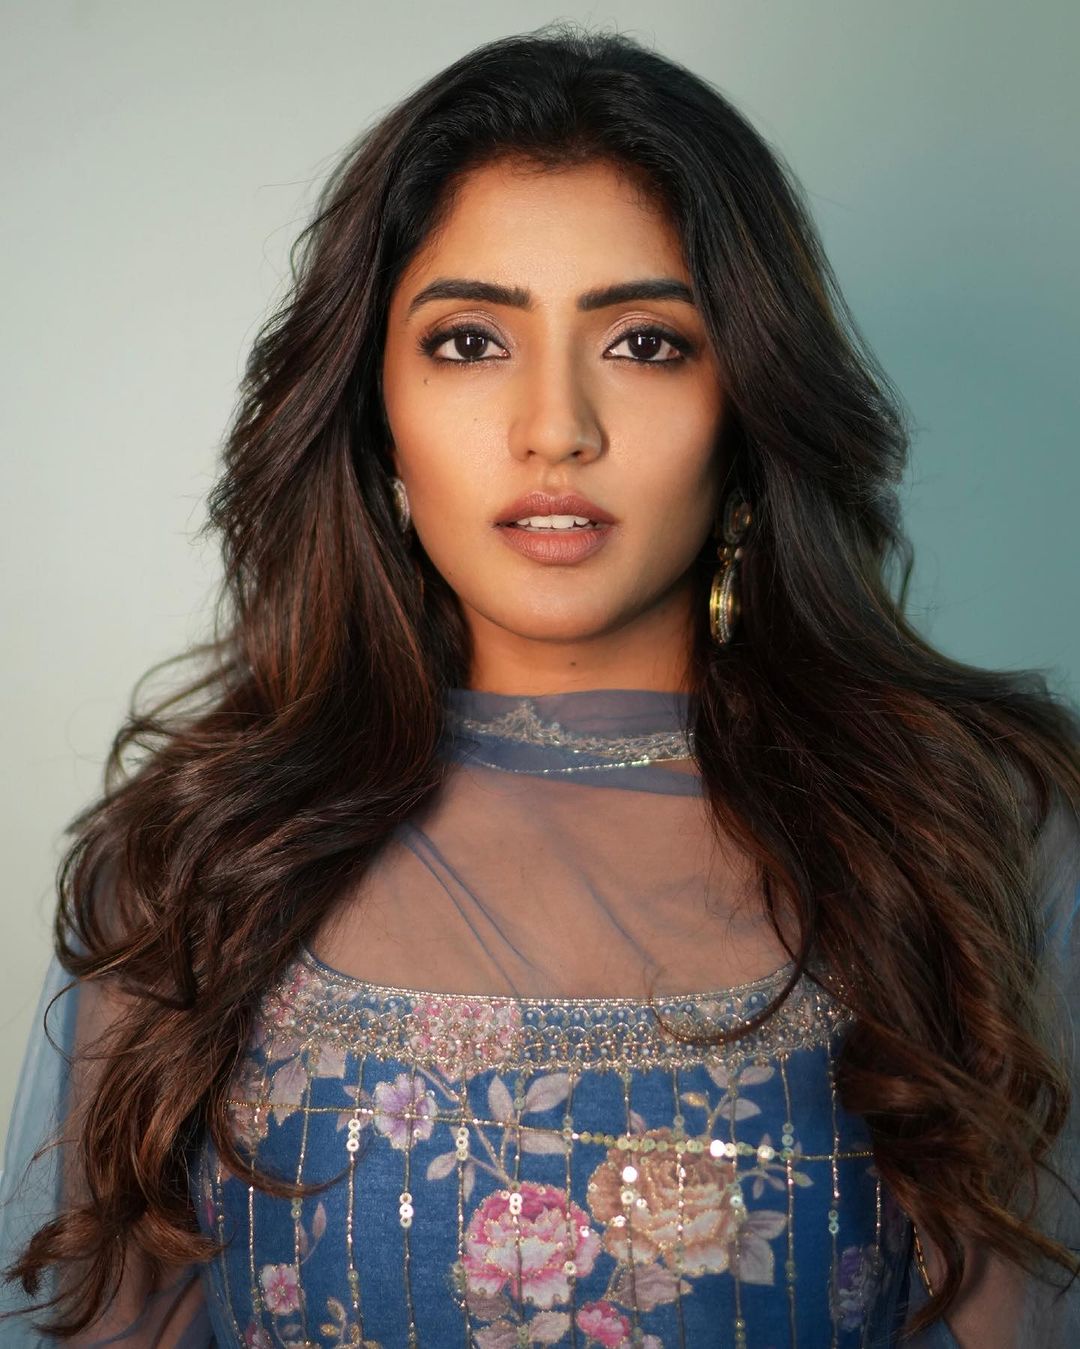 Actress eesha rebba these pictures looks cool and cute-Eesharebba, Eesha Rebba Hot, Eesha Rebba Photos,Spicy Hot Pics,Images,High Resolution WallPapers Download